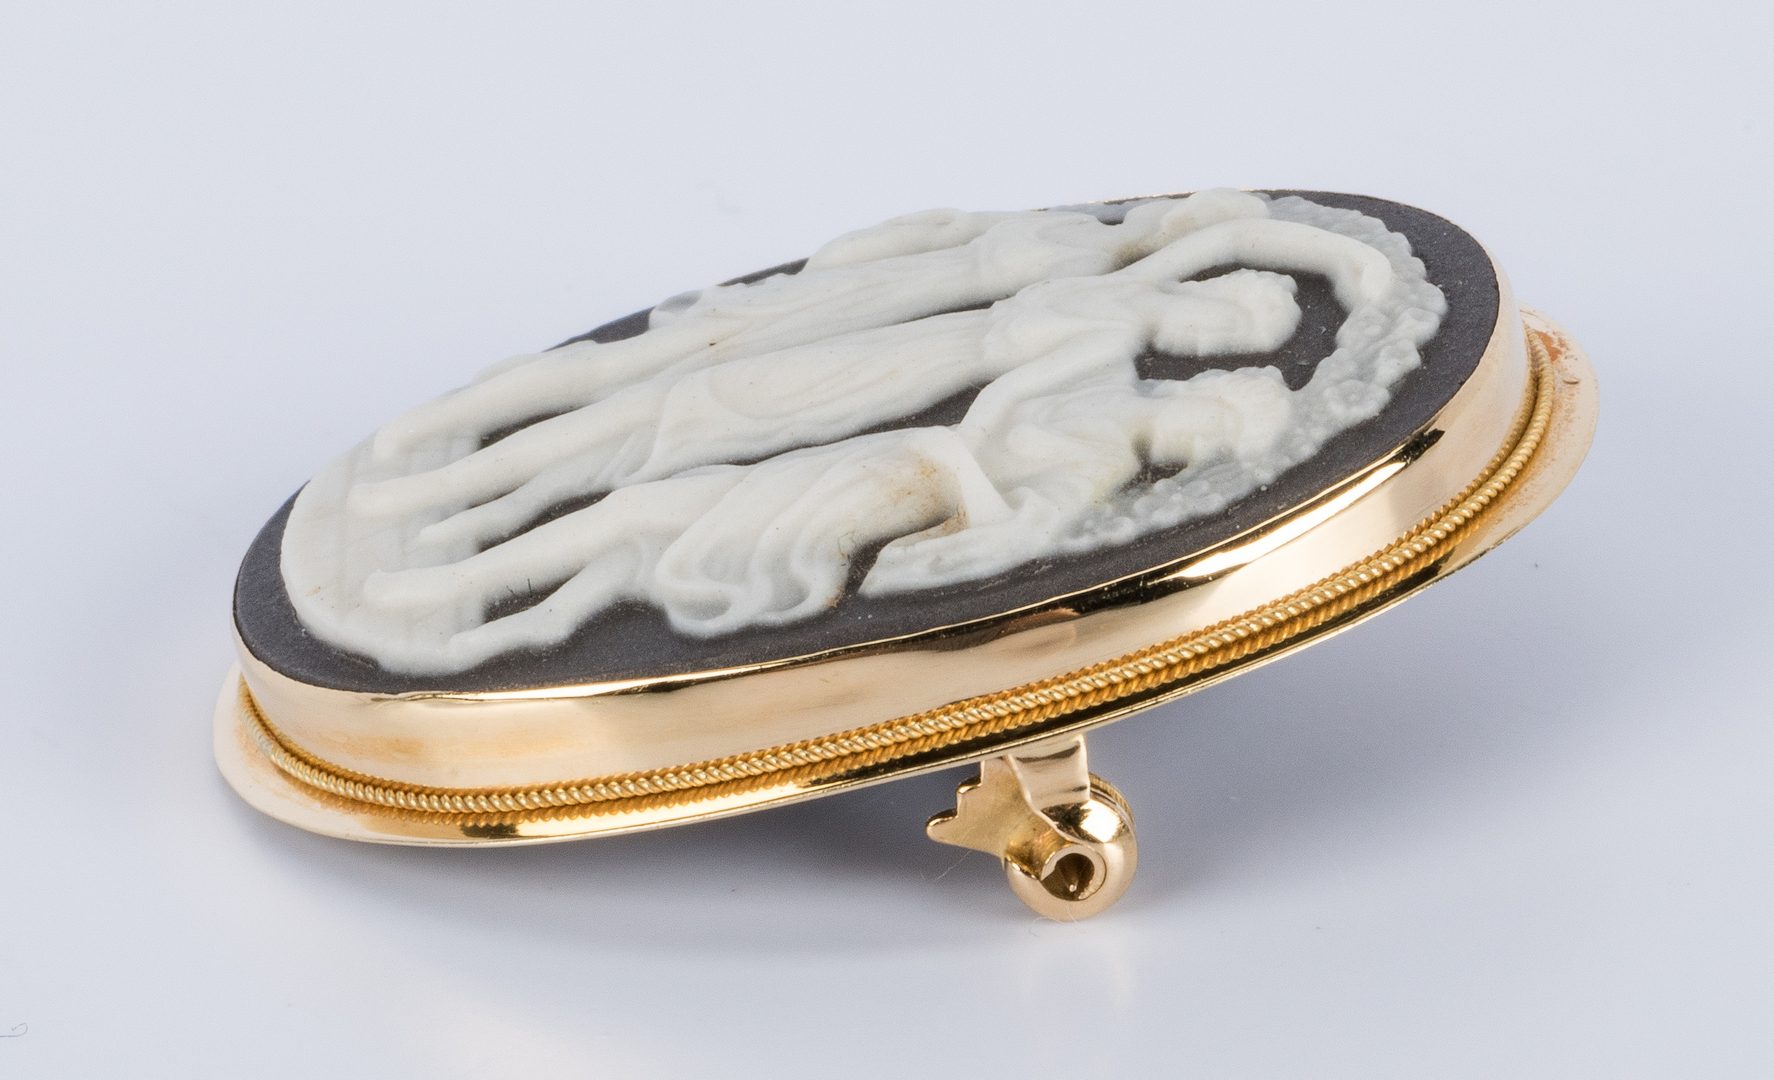 Lot 855: Ladies Gold Watch and Cameo, 2 pcs